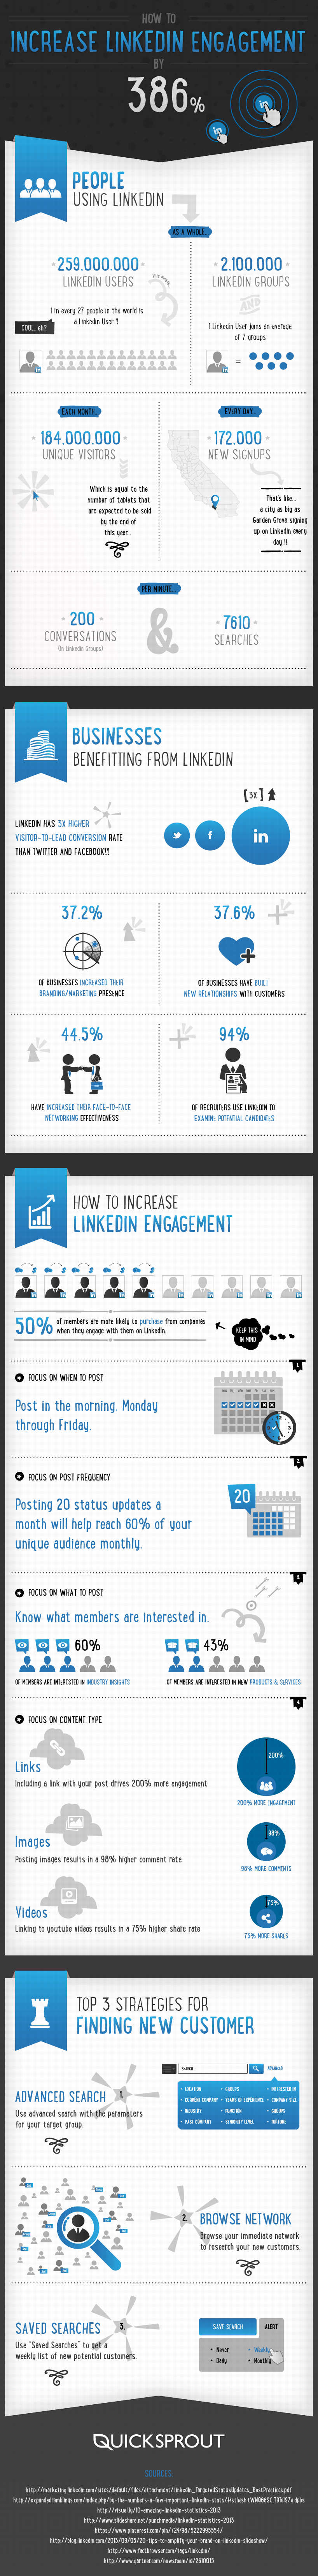 Increase LinkedIn Engagement by 386%25 Infographic